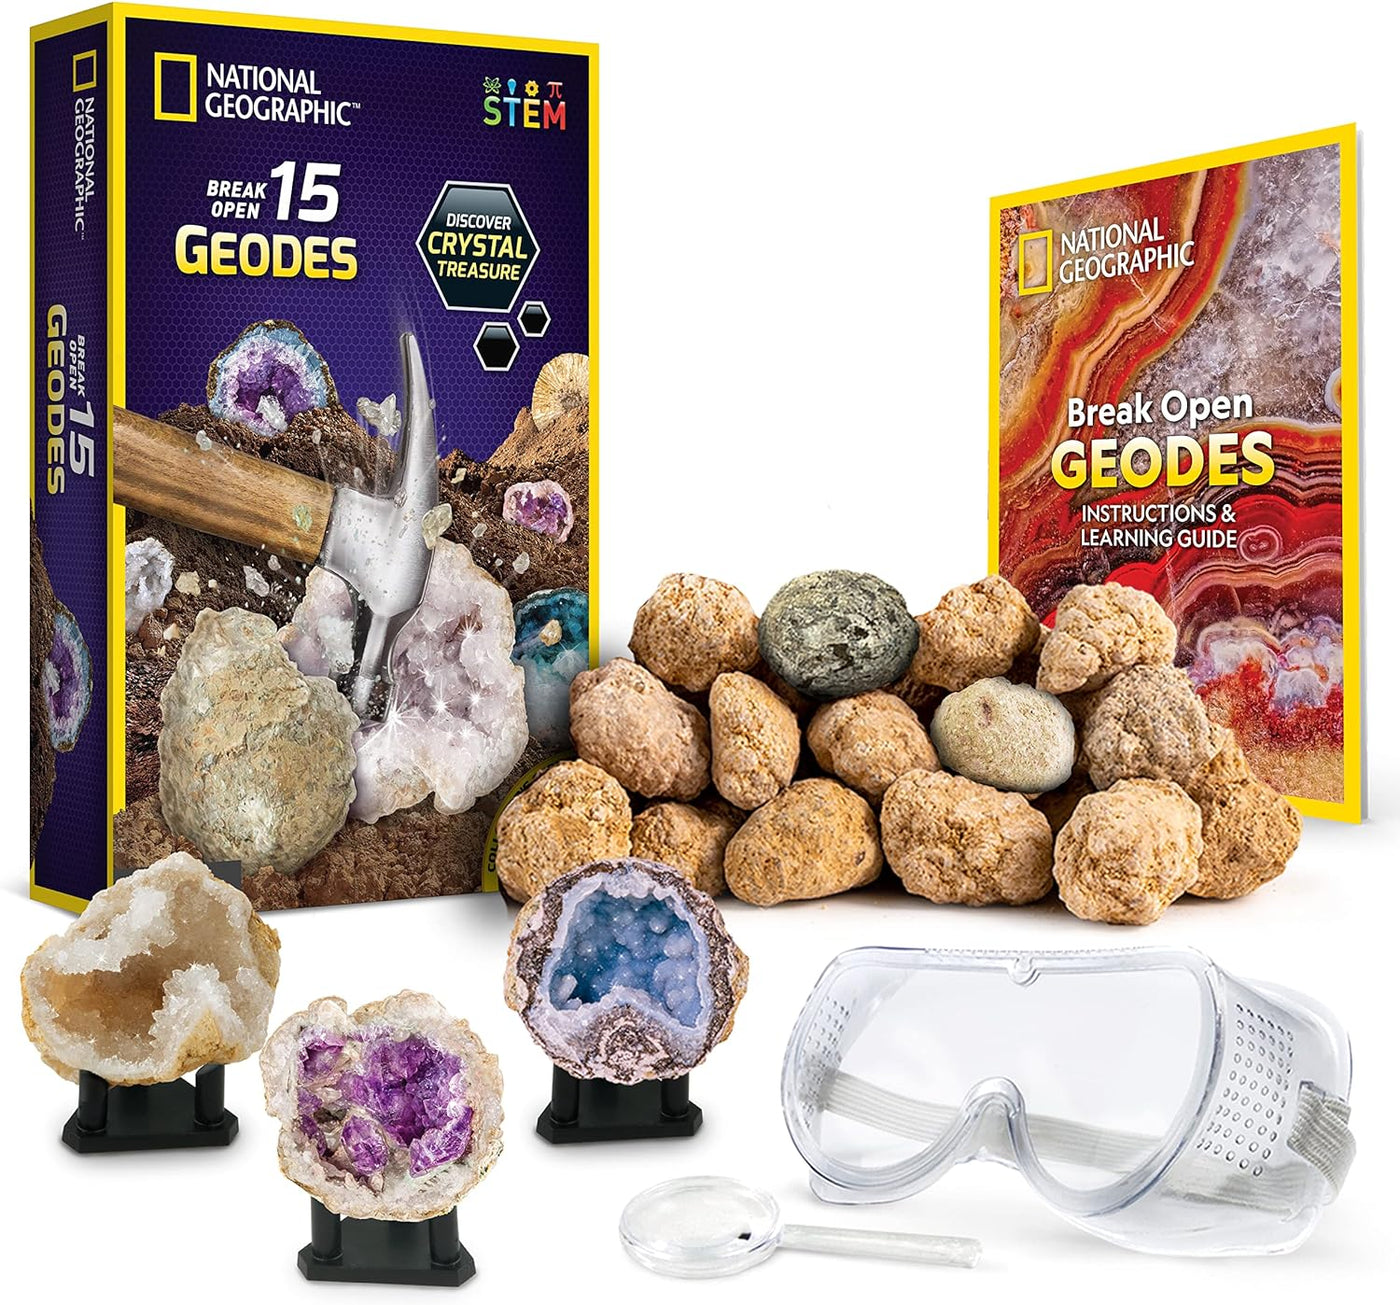 NATIONAL GEOGRAPHIC - Break Open 15 Premium Geodes – Includes Goggles, Detailed Learning Guide and 3 Display Stands - Great STEM Science Gift for Mineralogy and Geology Enthusiasts of any Age